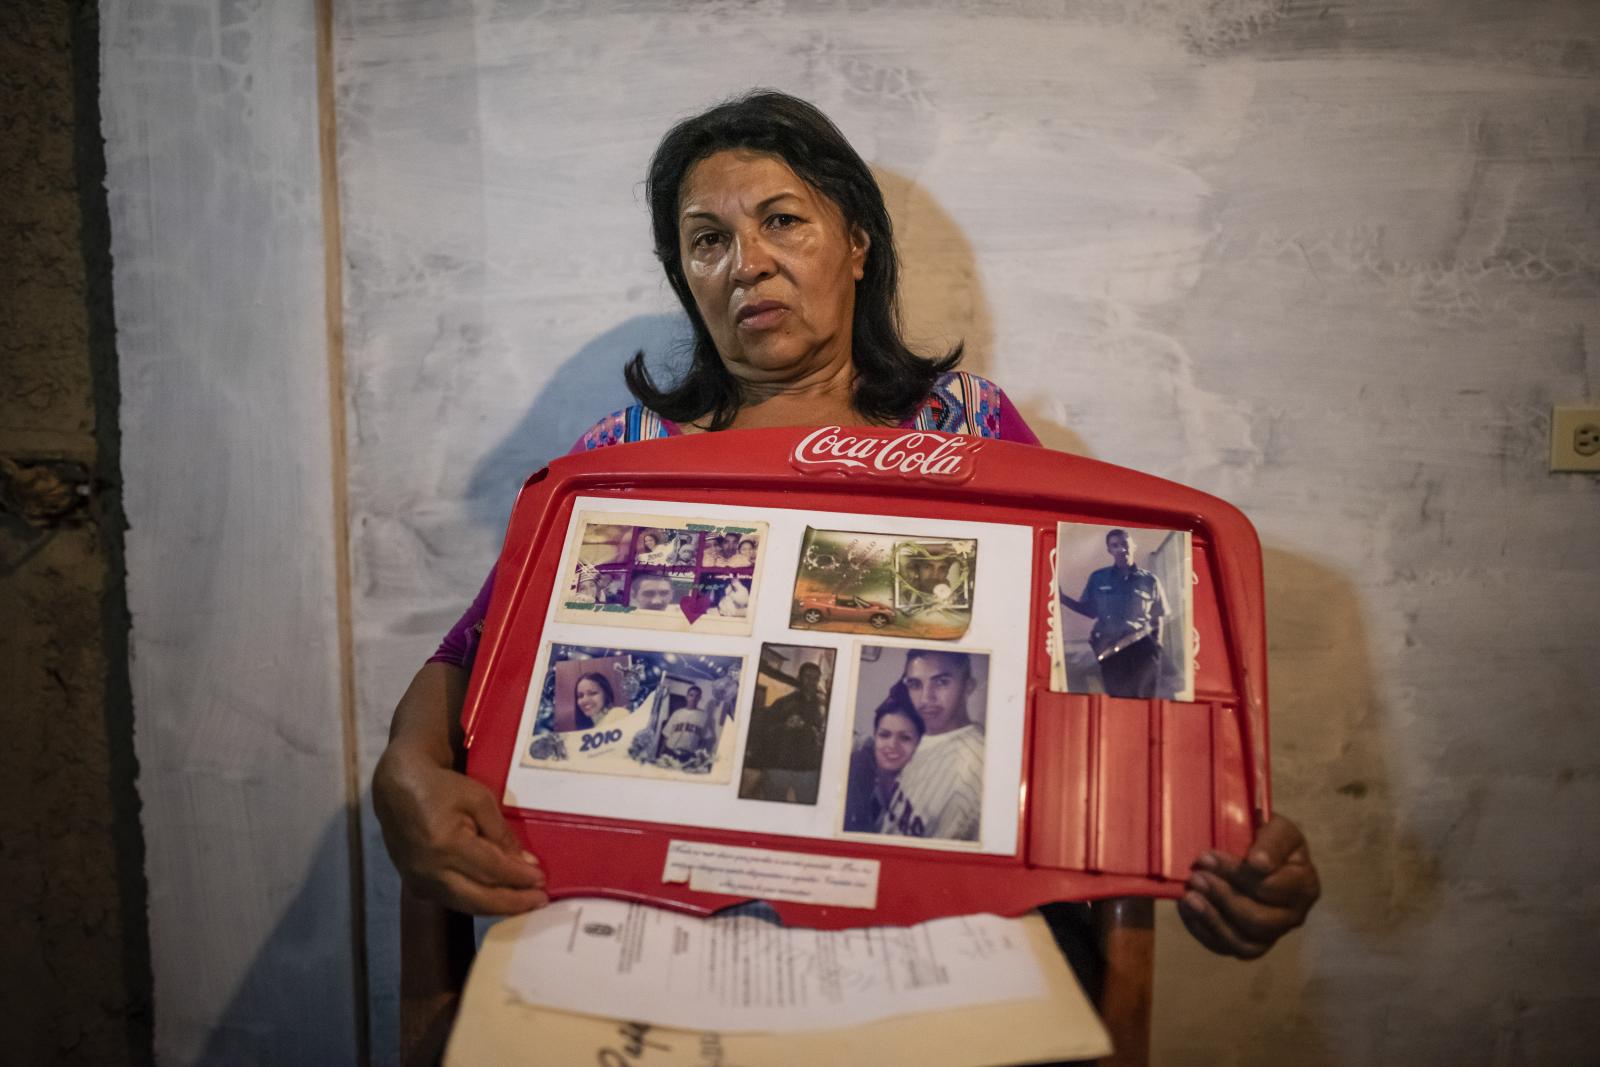 Venezuela / Between violence and justice - The mother of a murdered young man shows a picture with...